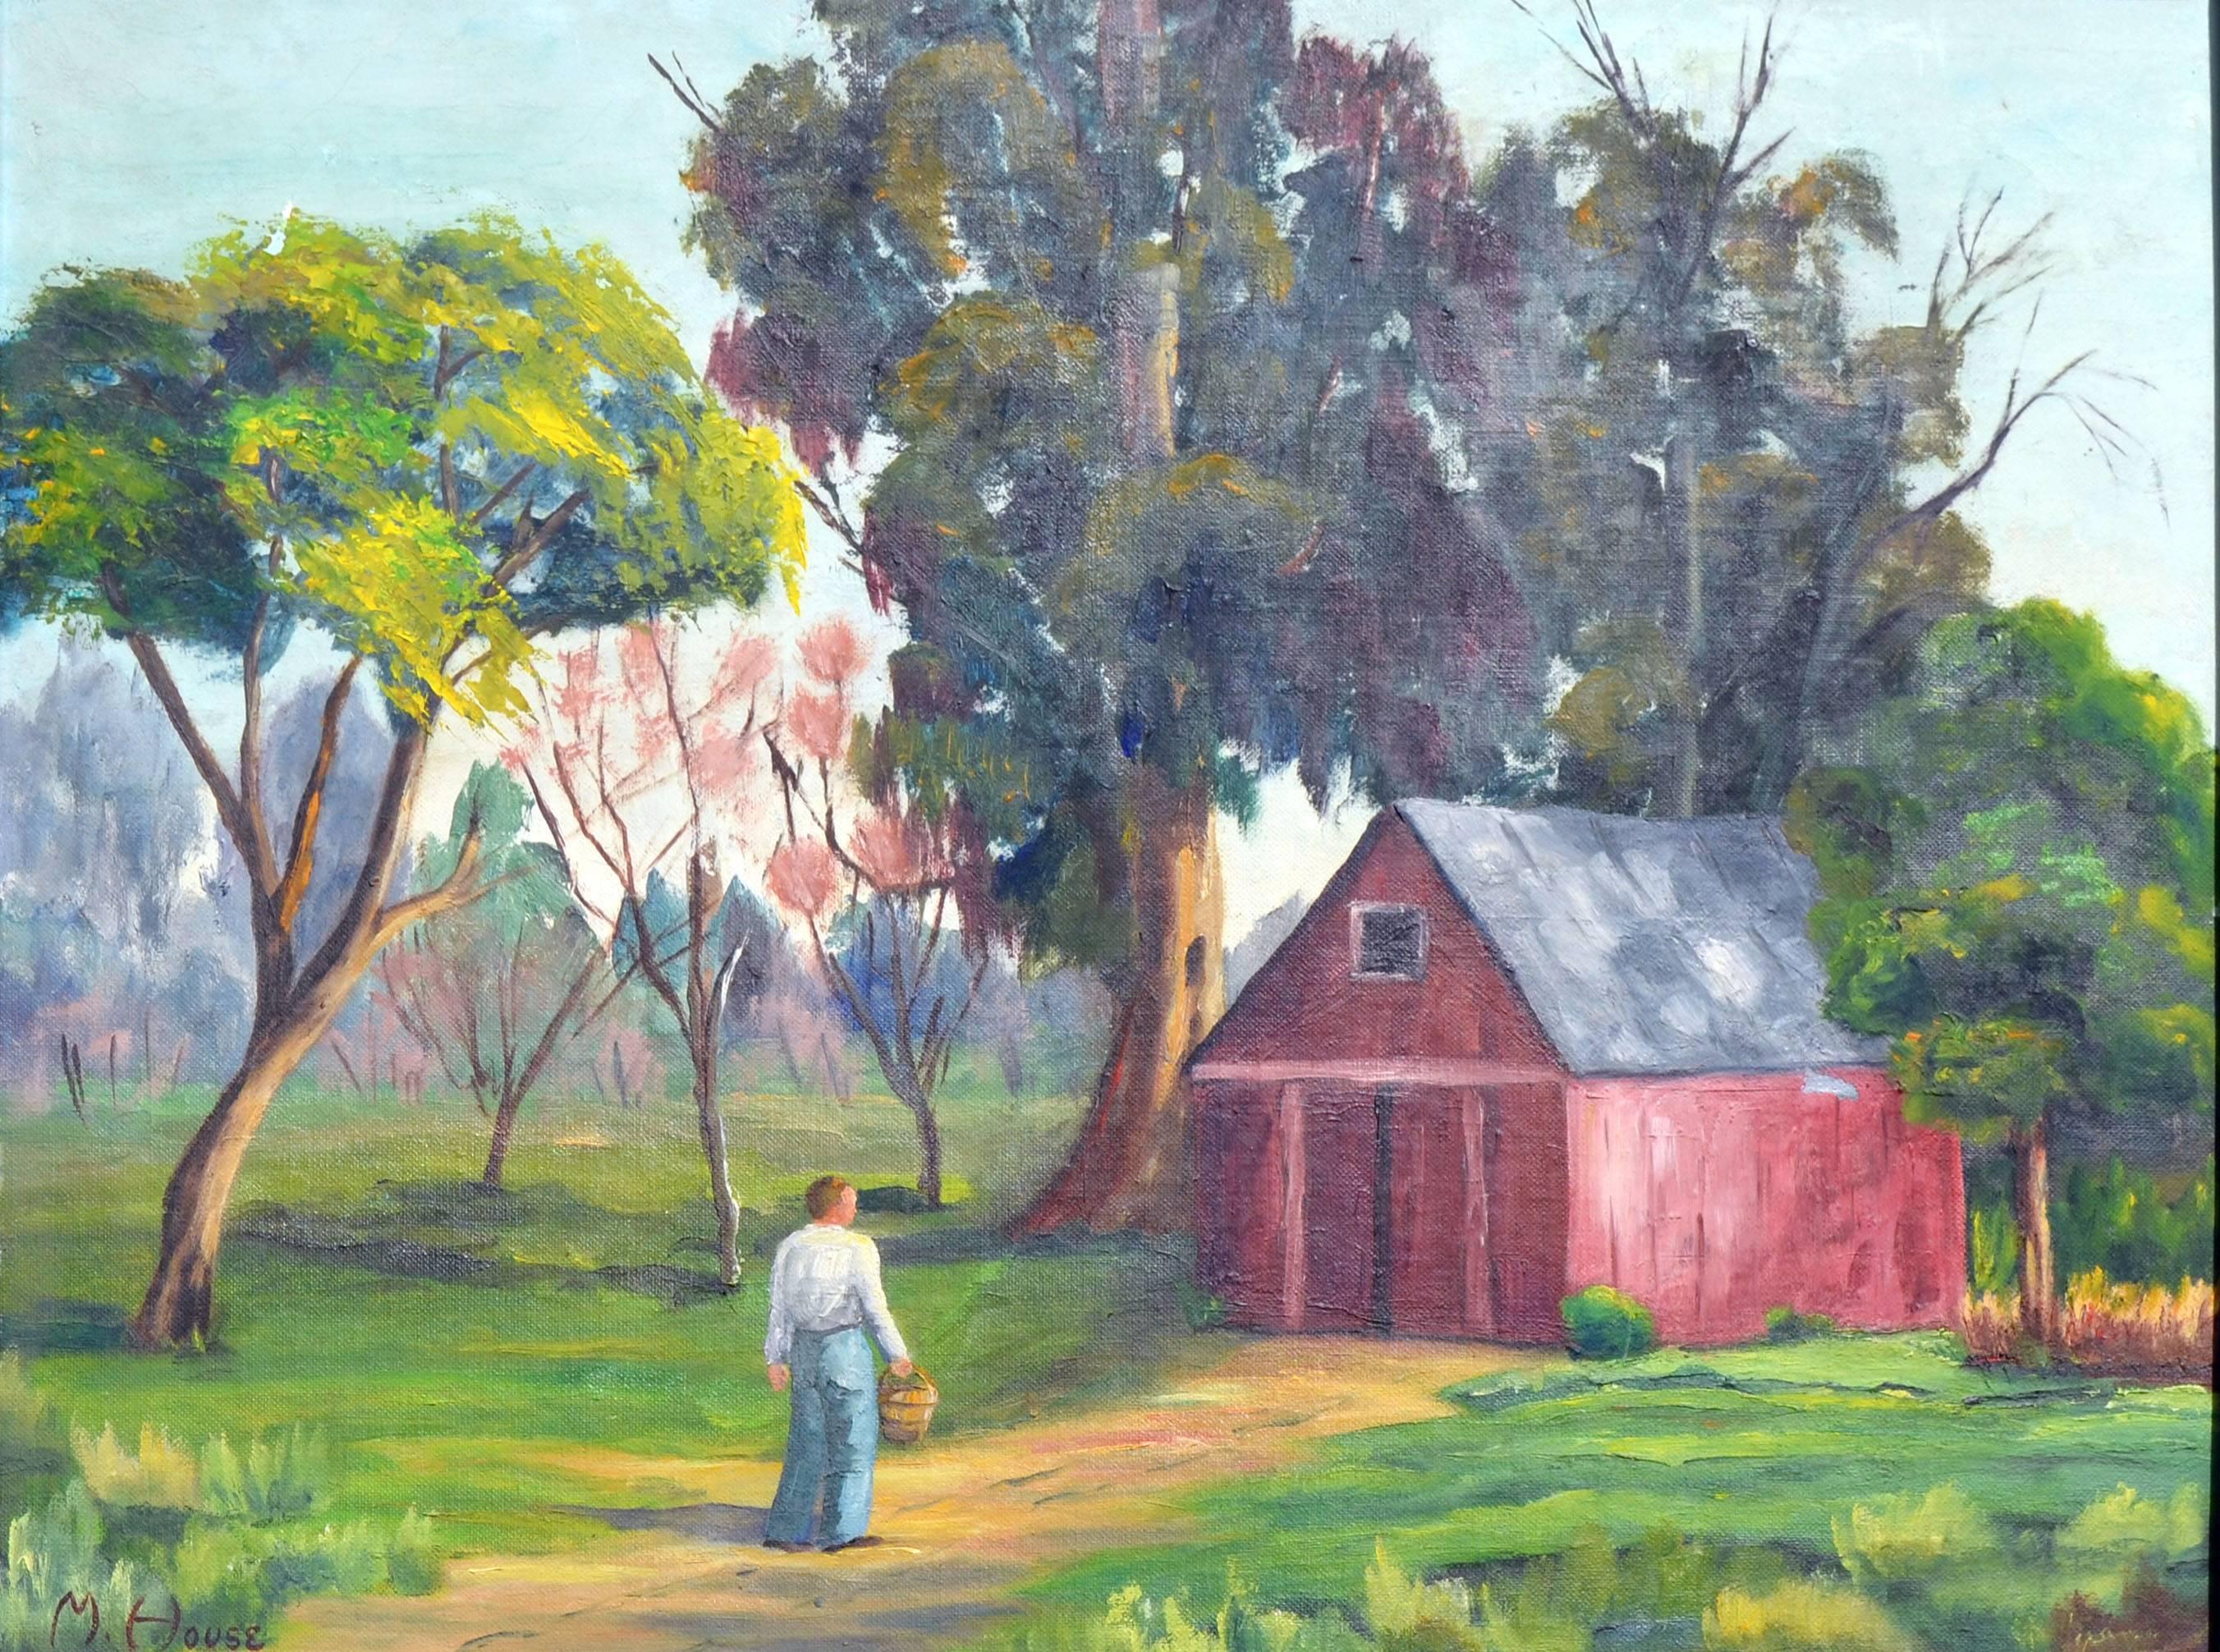 Mid Century Figurative Landscape with Red Barn & Yellow Tree - Painting by M. House